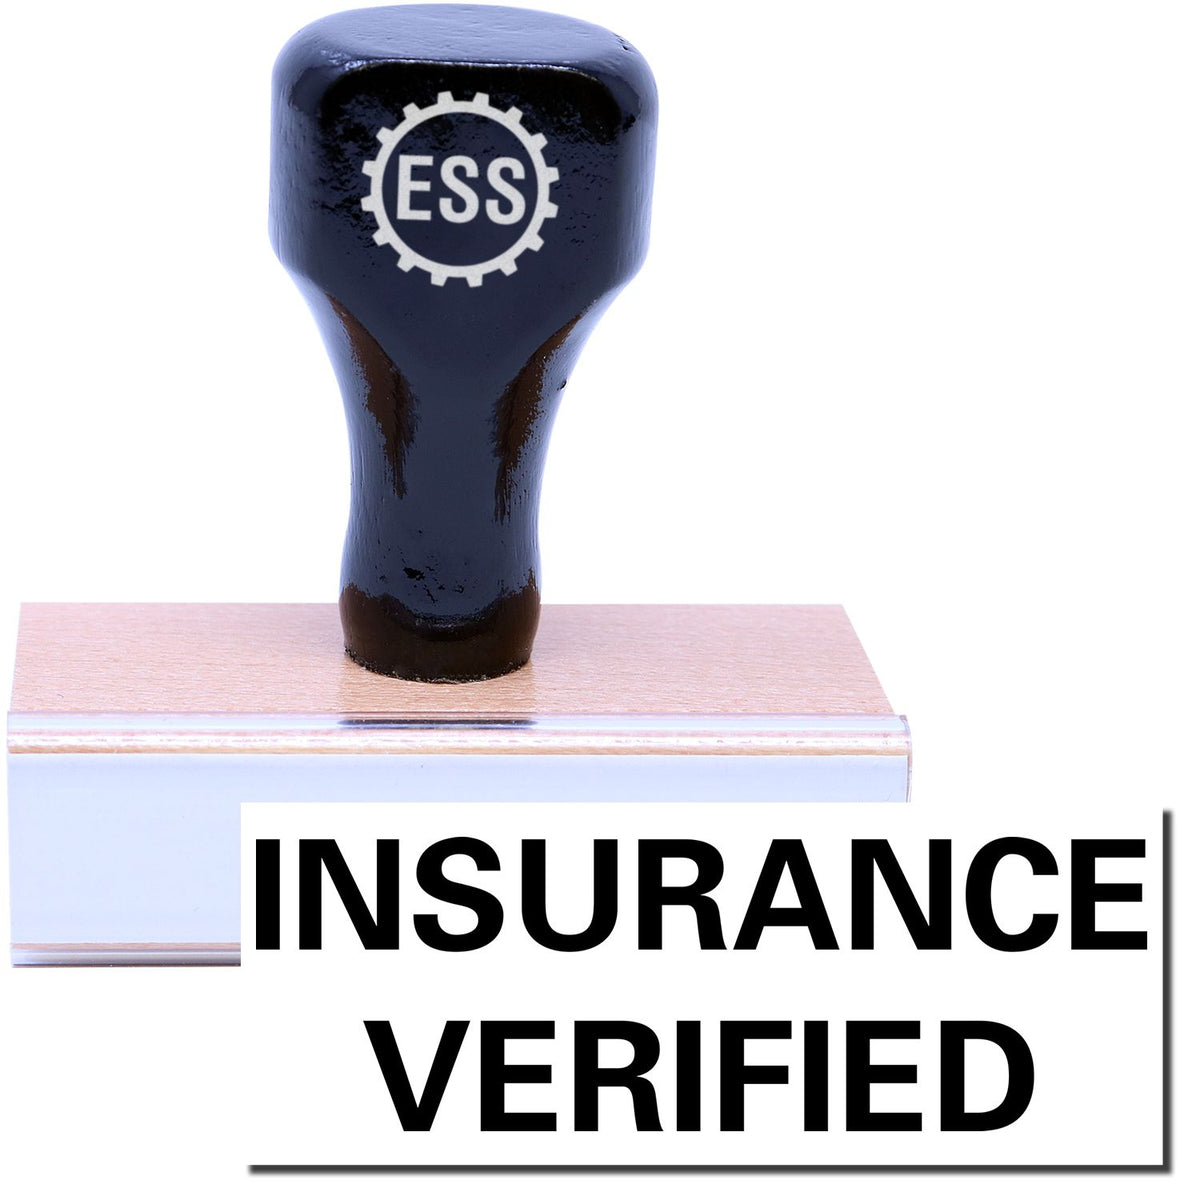 A stock office rubber stamp with a stamped image showing how the text &quot;INSURANCE VERIFIED&quot; in a large font is displayed after stamping.